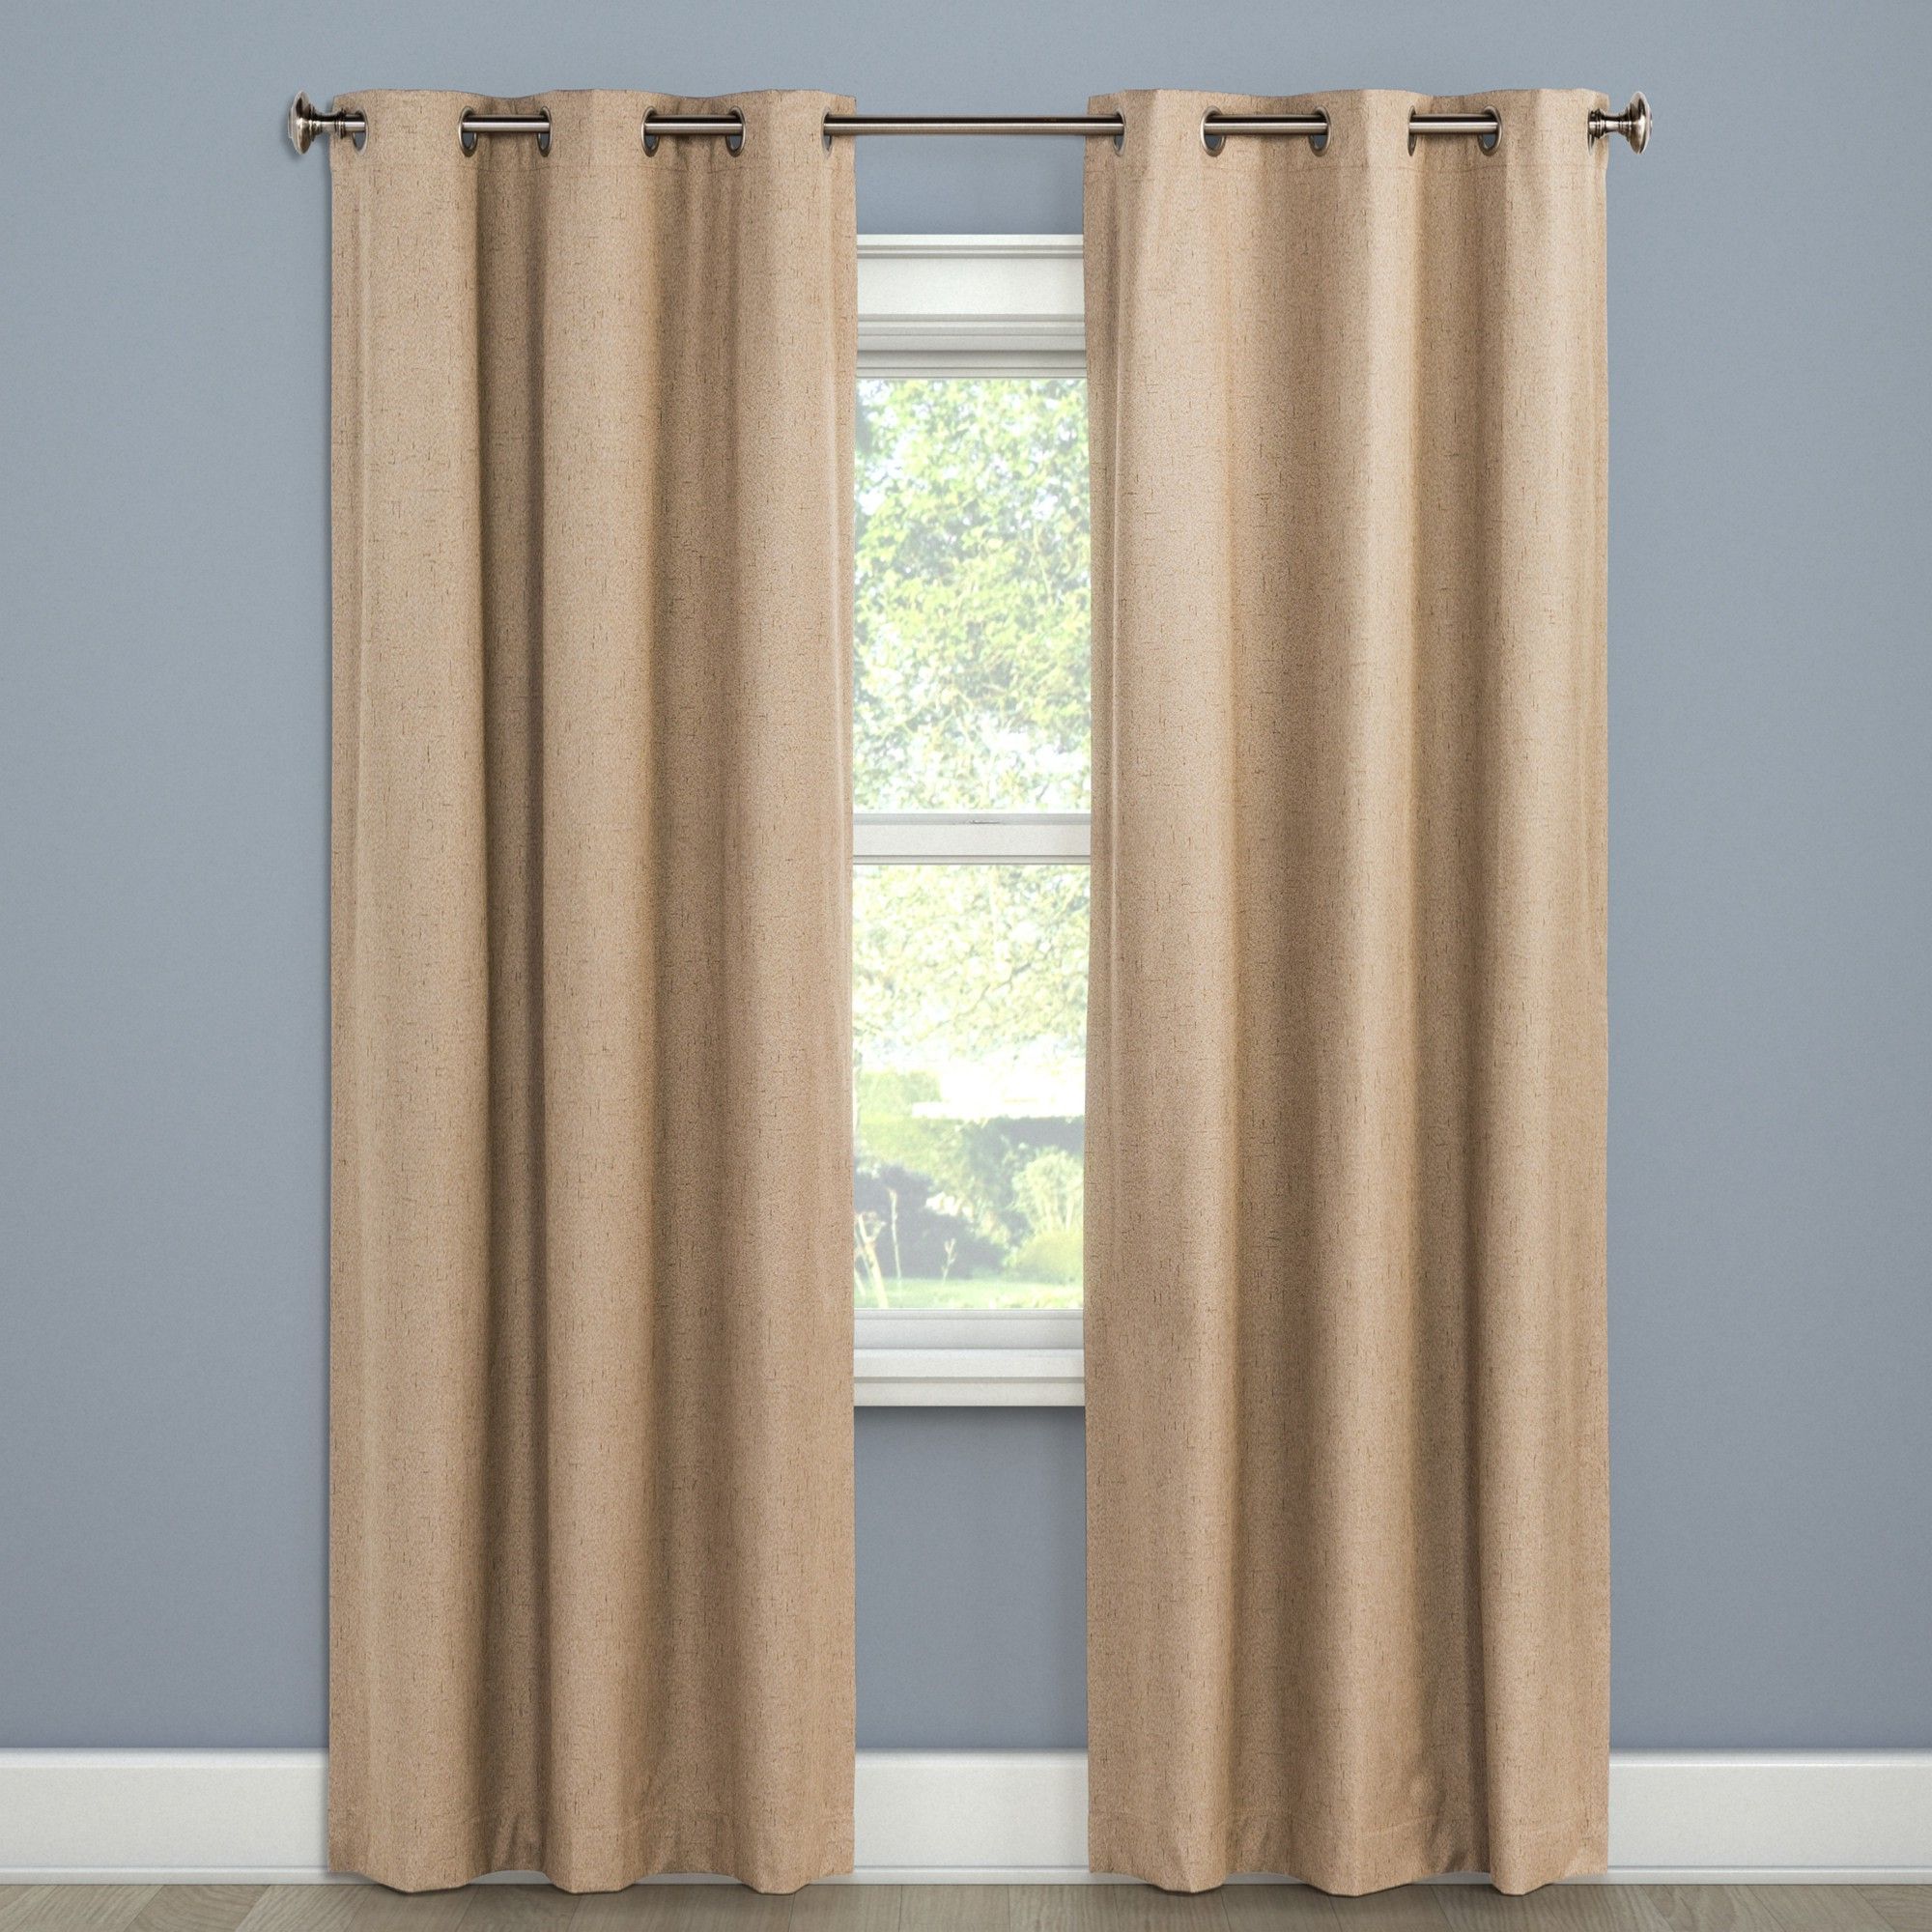 Well Known Windsor Curtain Panel Mushroom 95" – Eclipse, Size: 42"x95 Regarding Linen Button Window Curtains Single Panel (View 20 of 20)